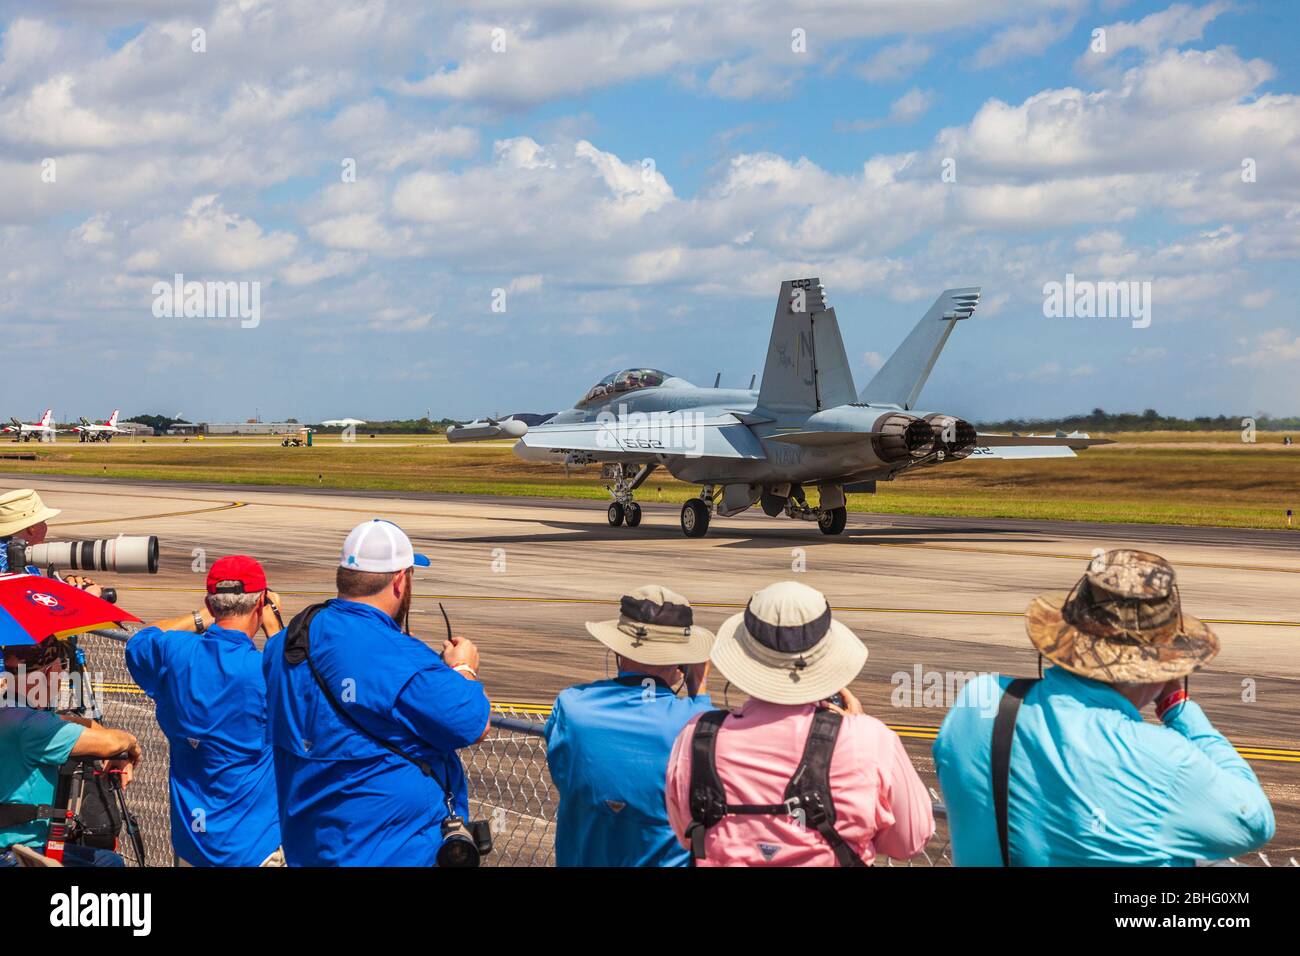 Boeing EA-18G Growler VAQ-129 at 2019 Wings Over Houston airshow at Ellington Field In Houston, Texas. Stock Photo